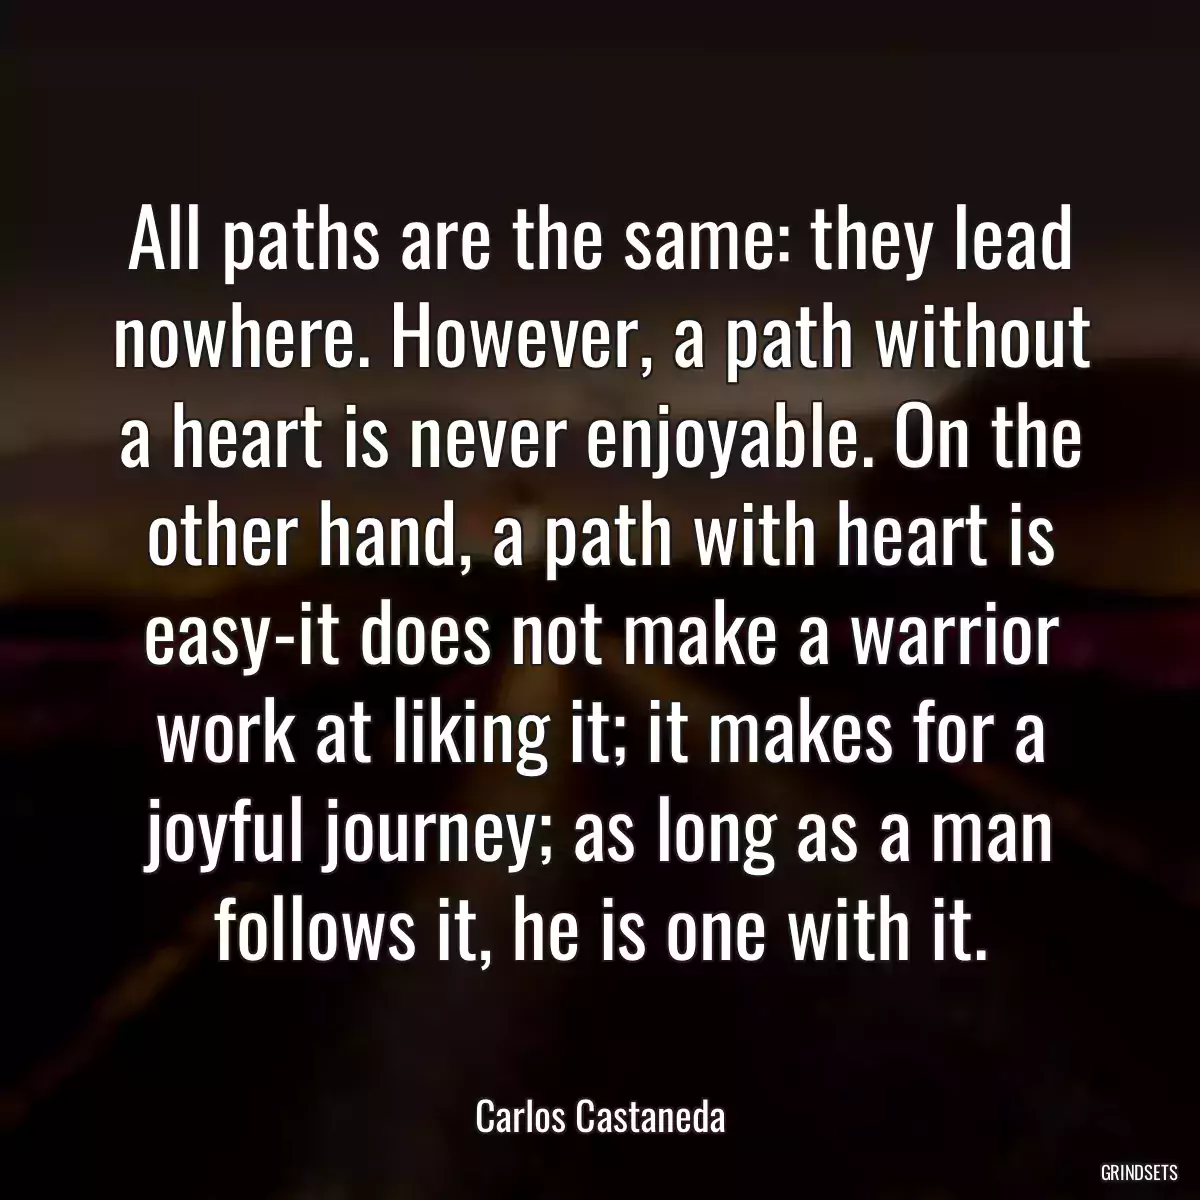 All paths are the same: they lead nowhere. However, a path without a heart is never enjoyable. On the other hand, a path with heart is easy-it does not make a warrior work at liking it; it makes for a joyful journey; as long as a man follows it, he is one with it.